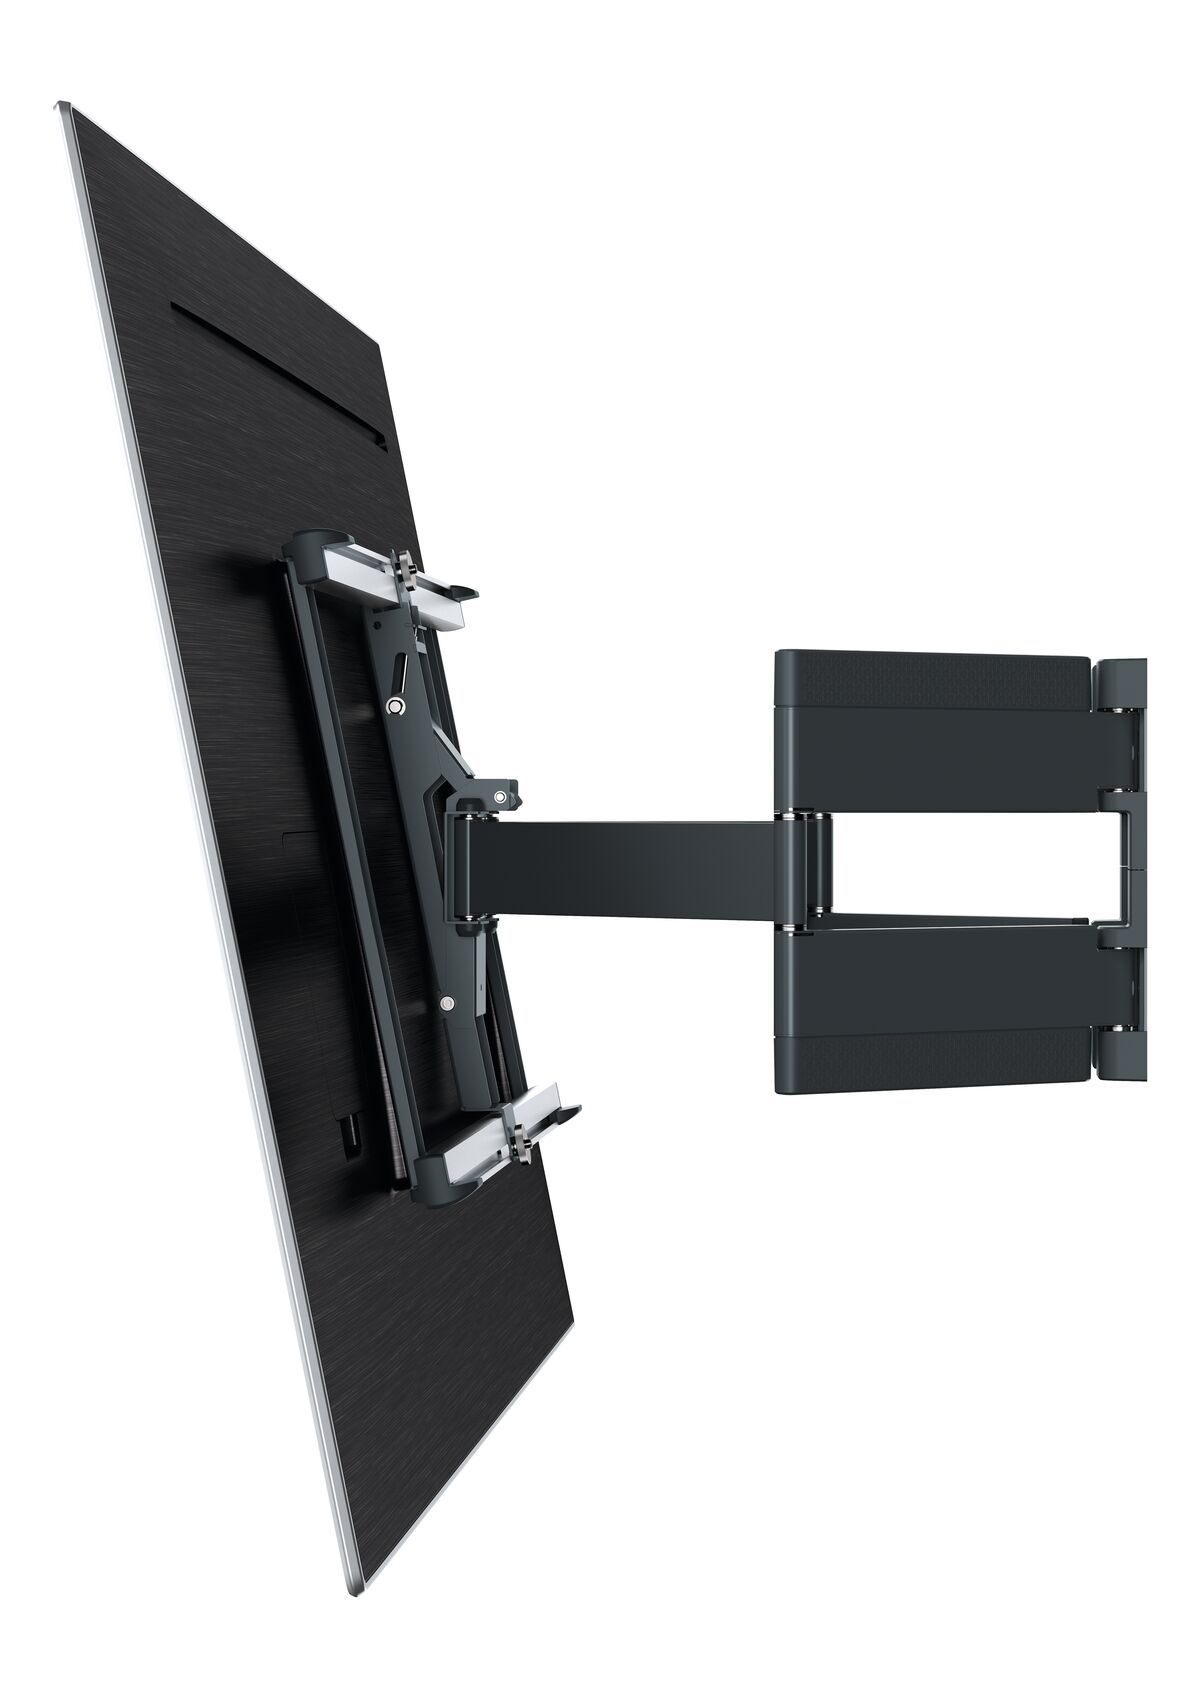 Vogel's THIN 550 wall mount